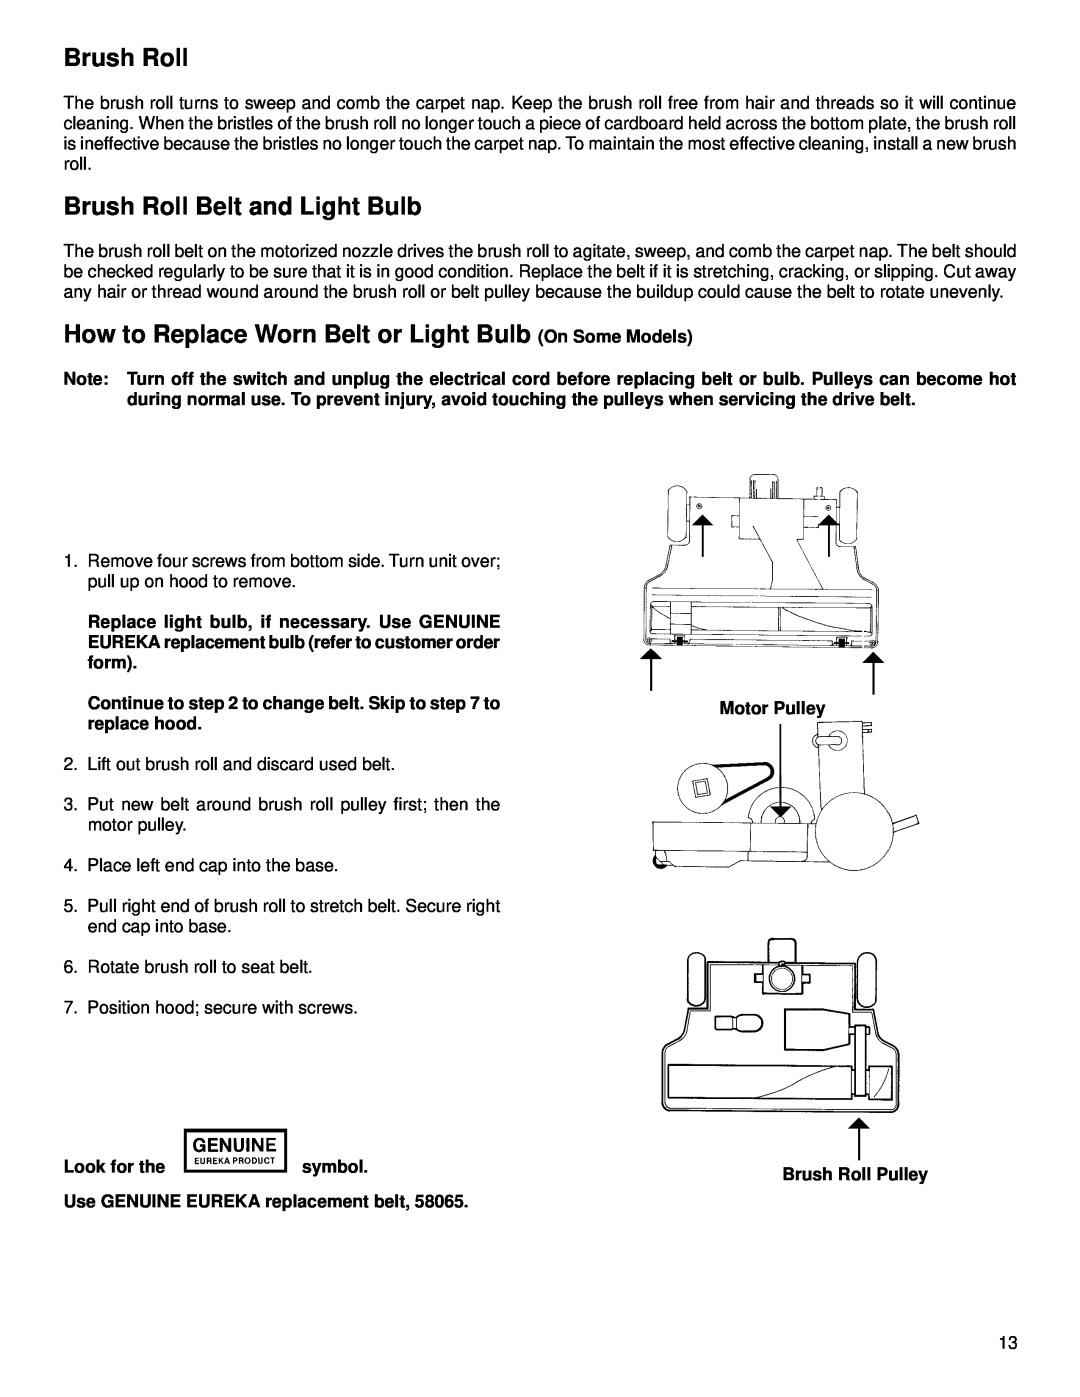 Eureka 6900 Series Brush Roll Belt and Light Bulb, How to Replace Worn Belt or Light Bulb On Some Models, Motor Pulley 